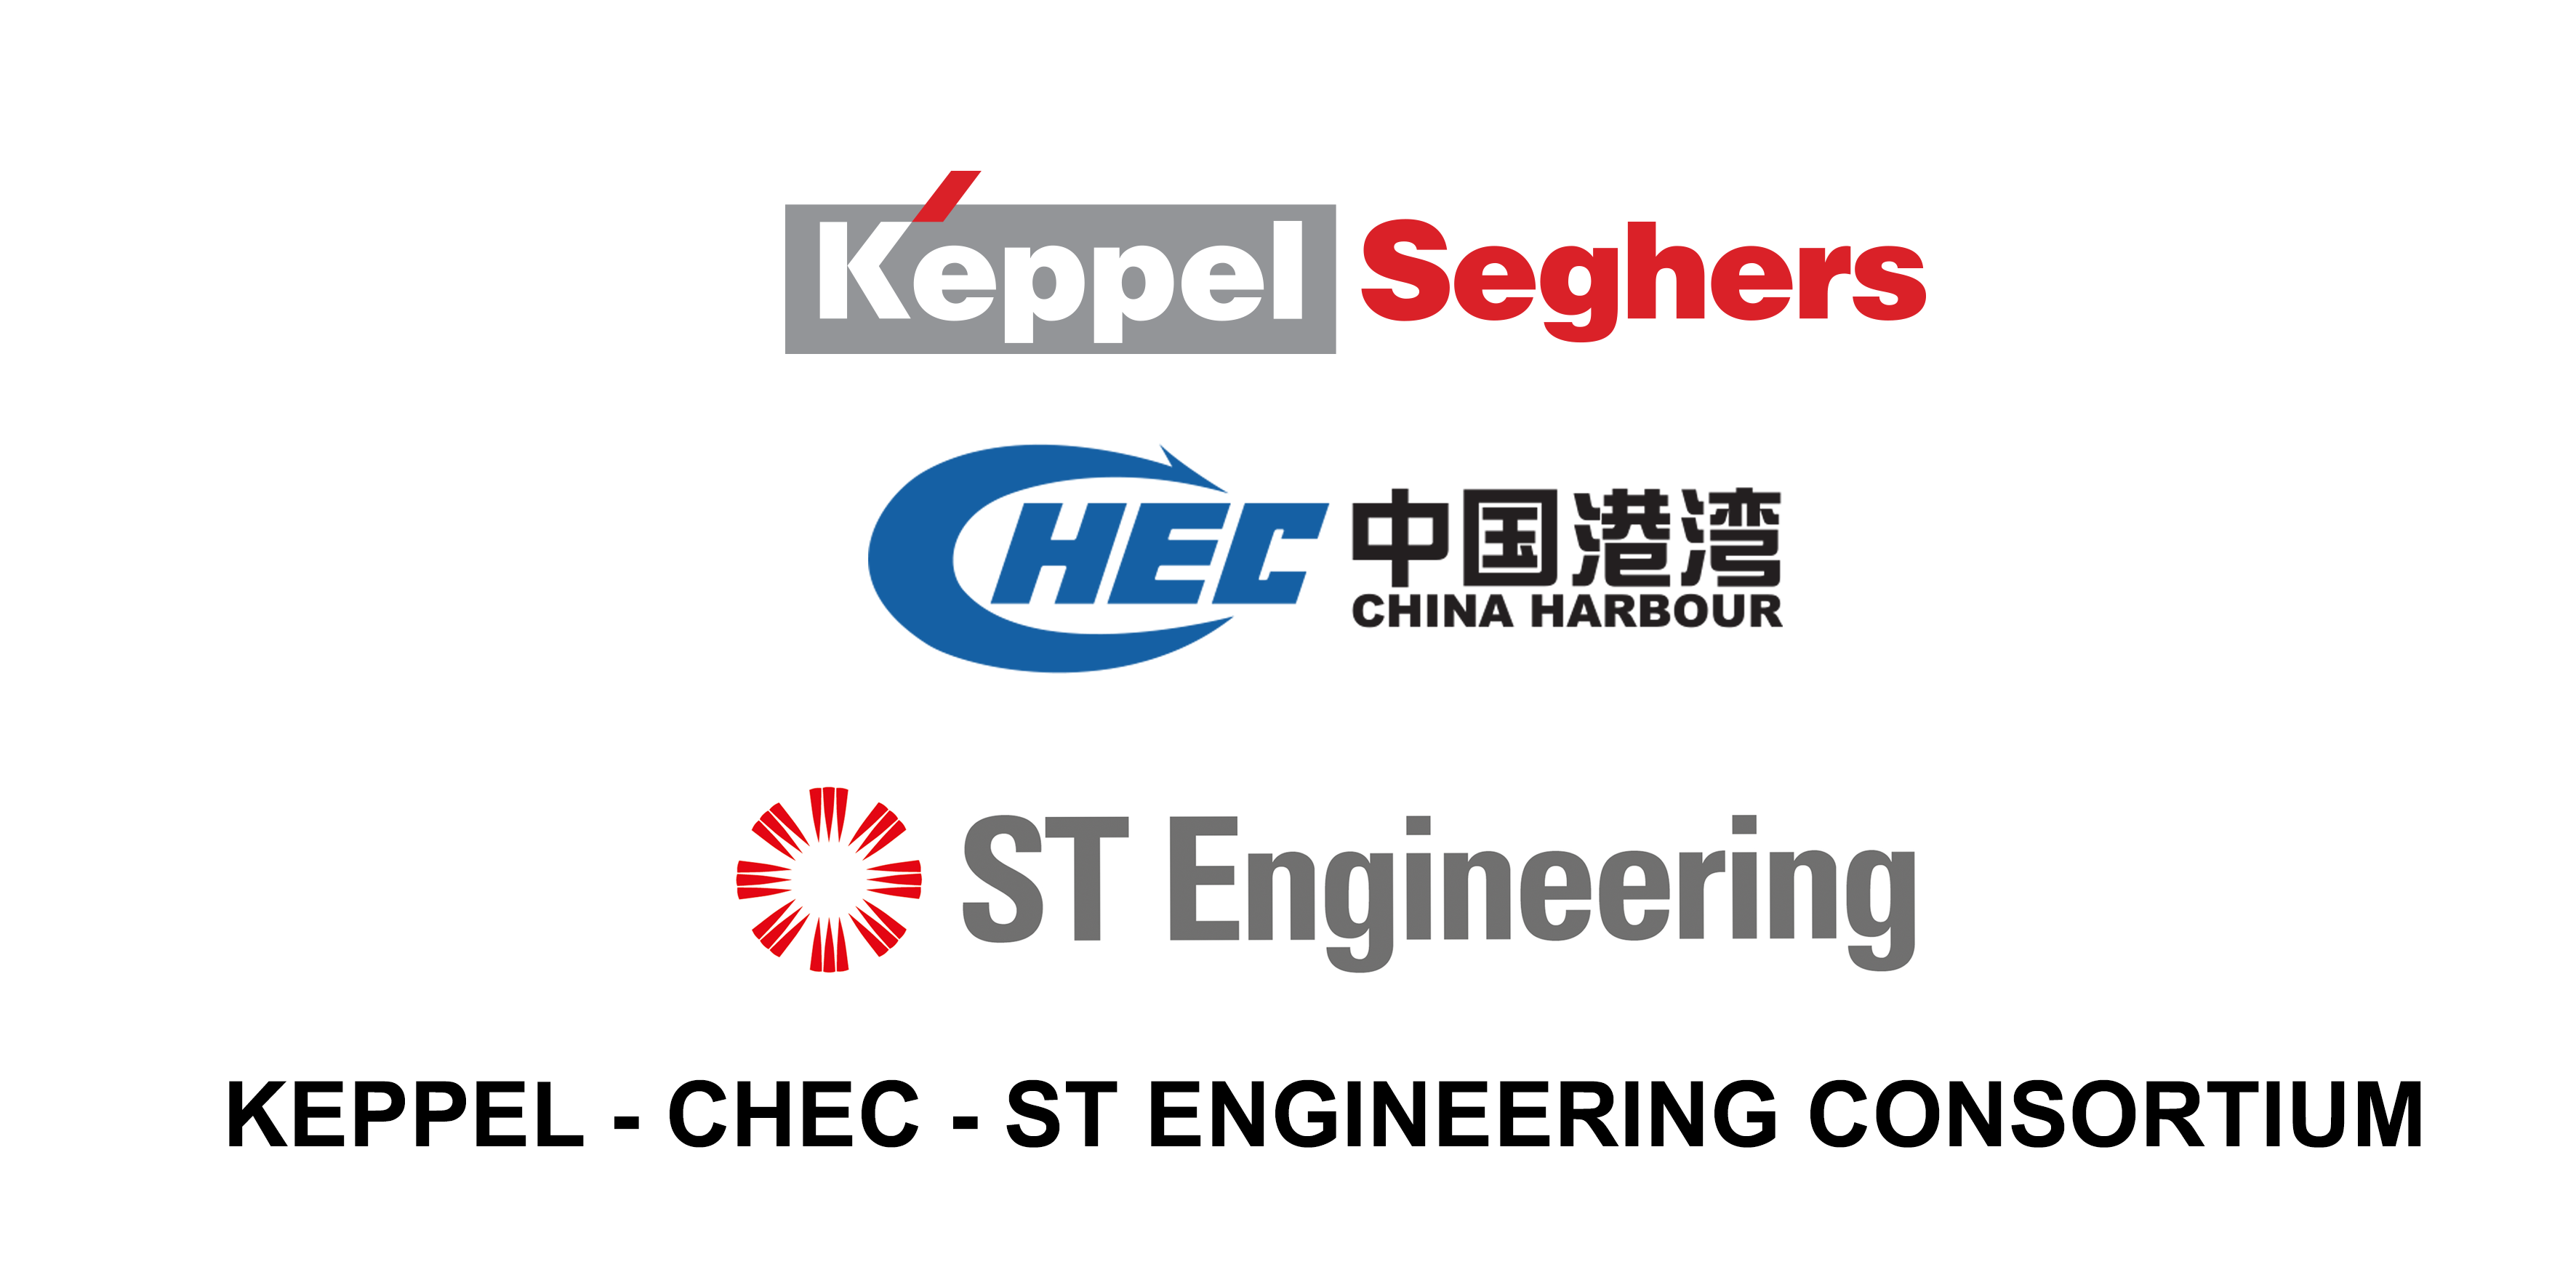 Keppel Seghers, China Harbour And ST Engineering Consortium